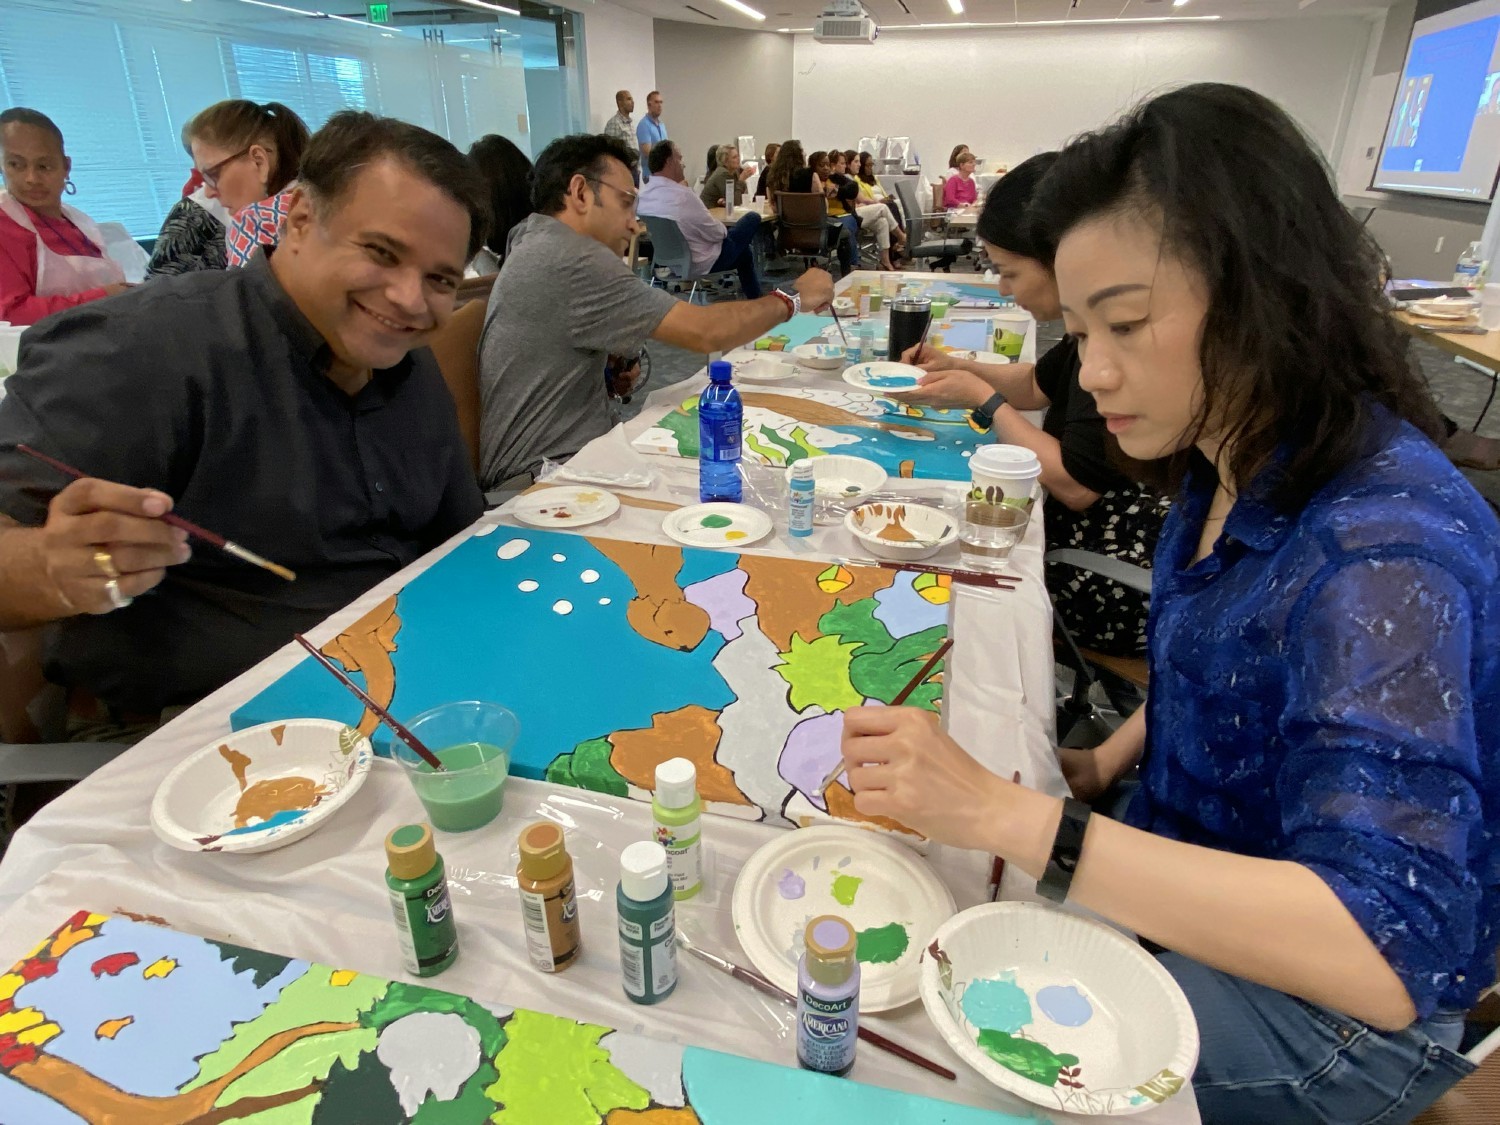 SAP Atlanta participating in People Experience Day coming together through art.